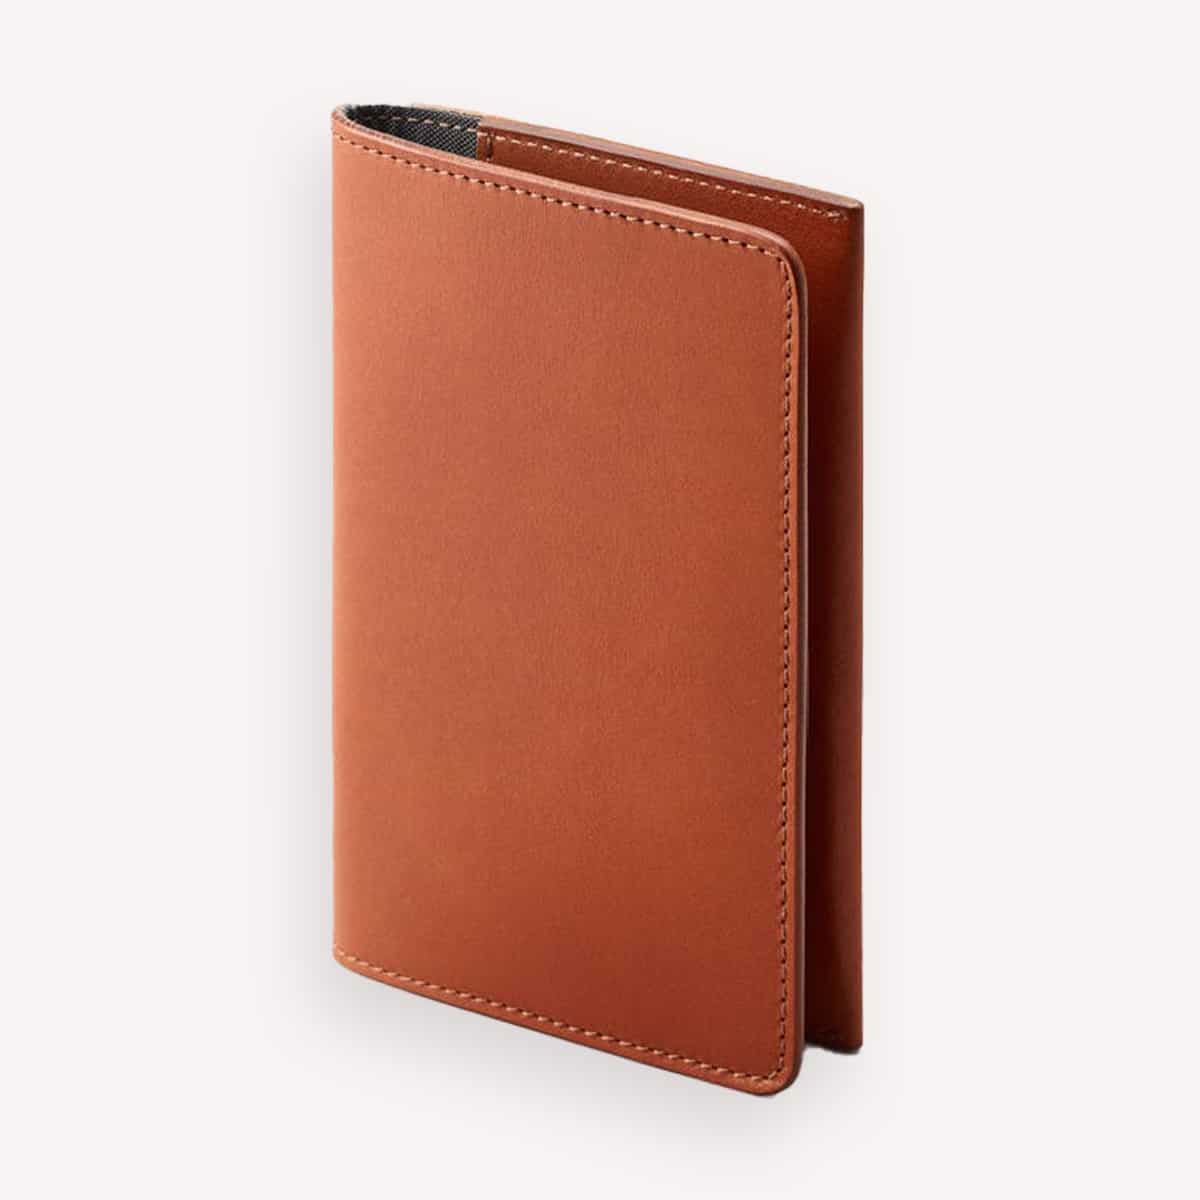 16 best passport holders and wallets in 2023, starting at $4